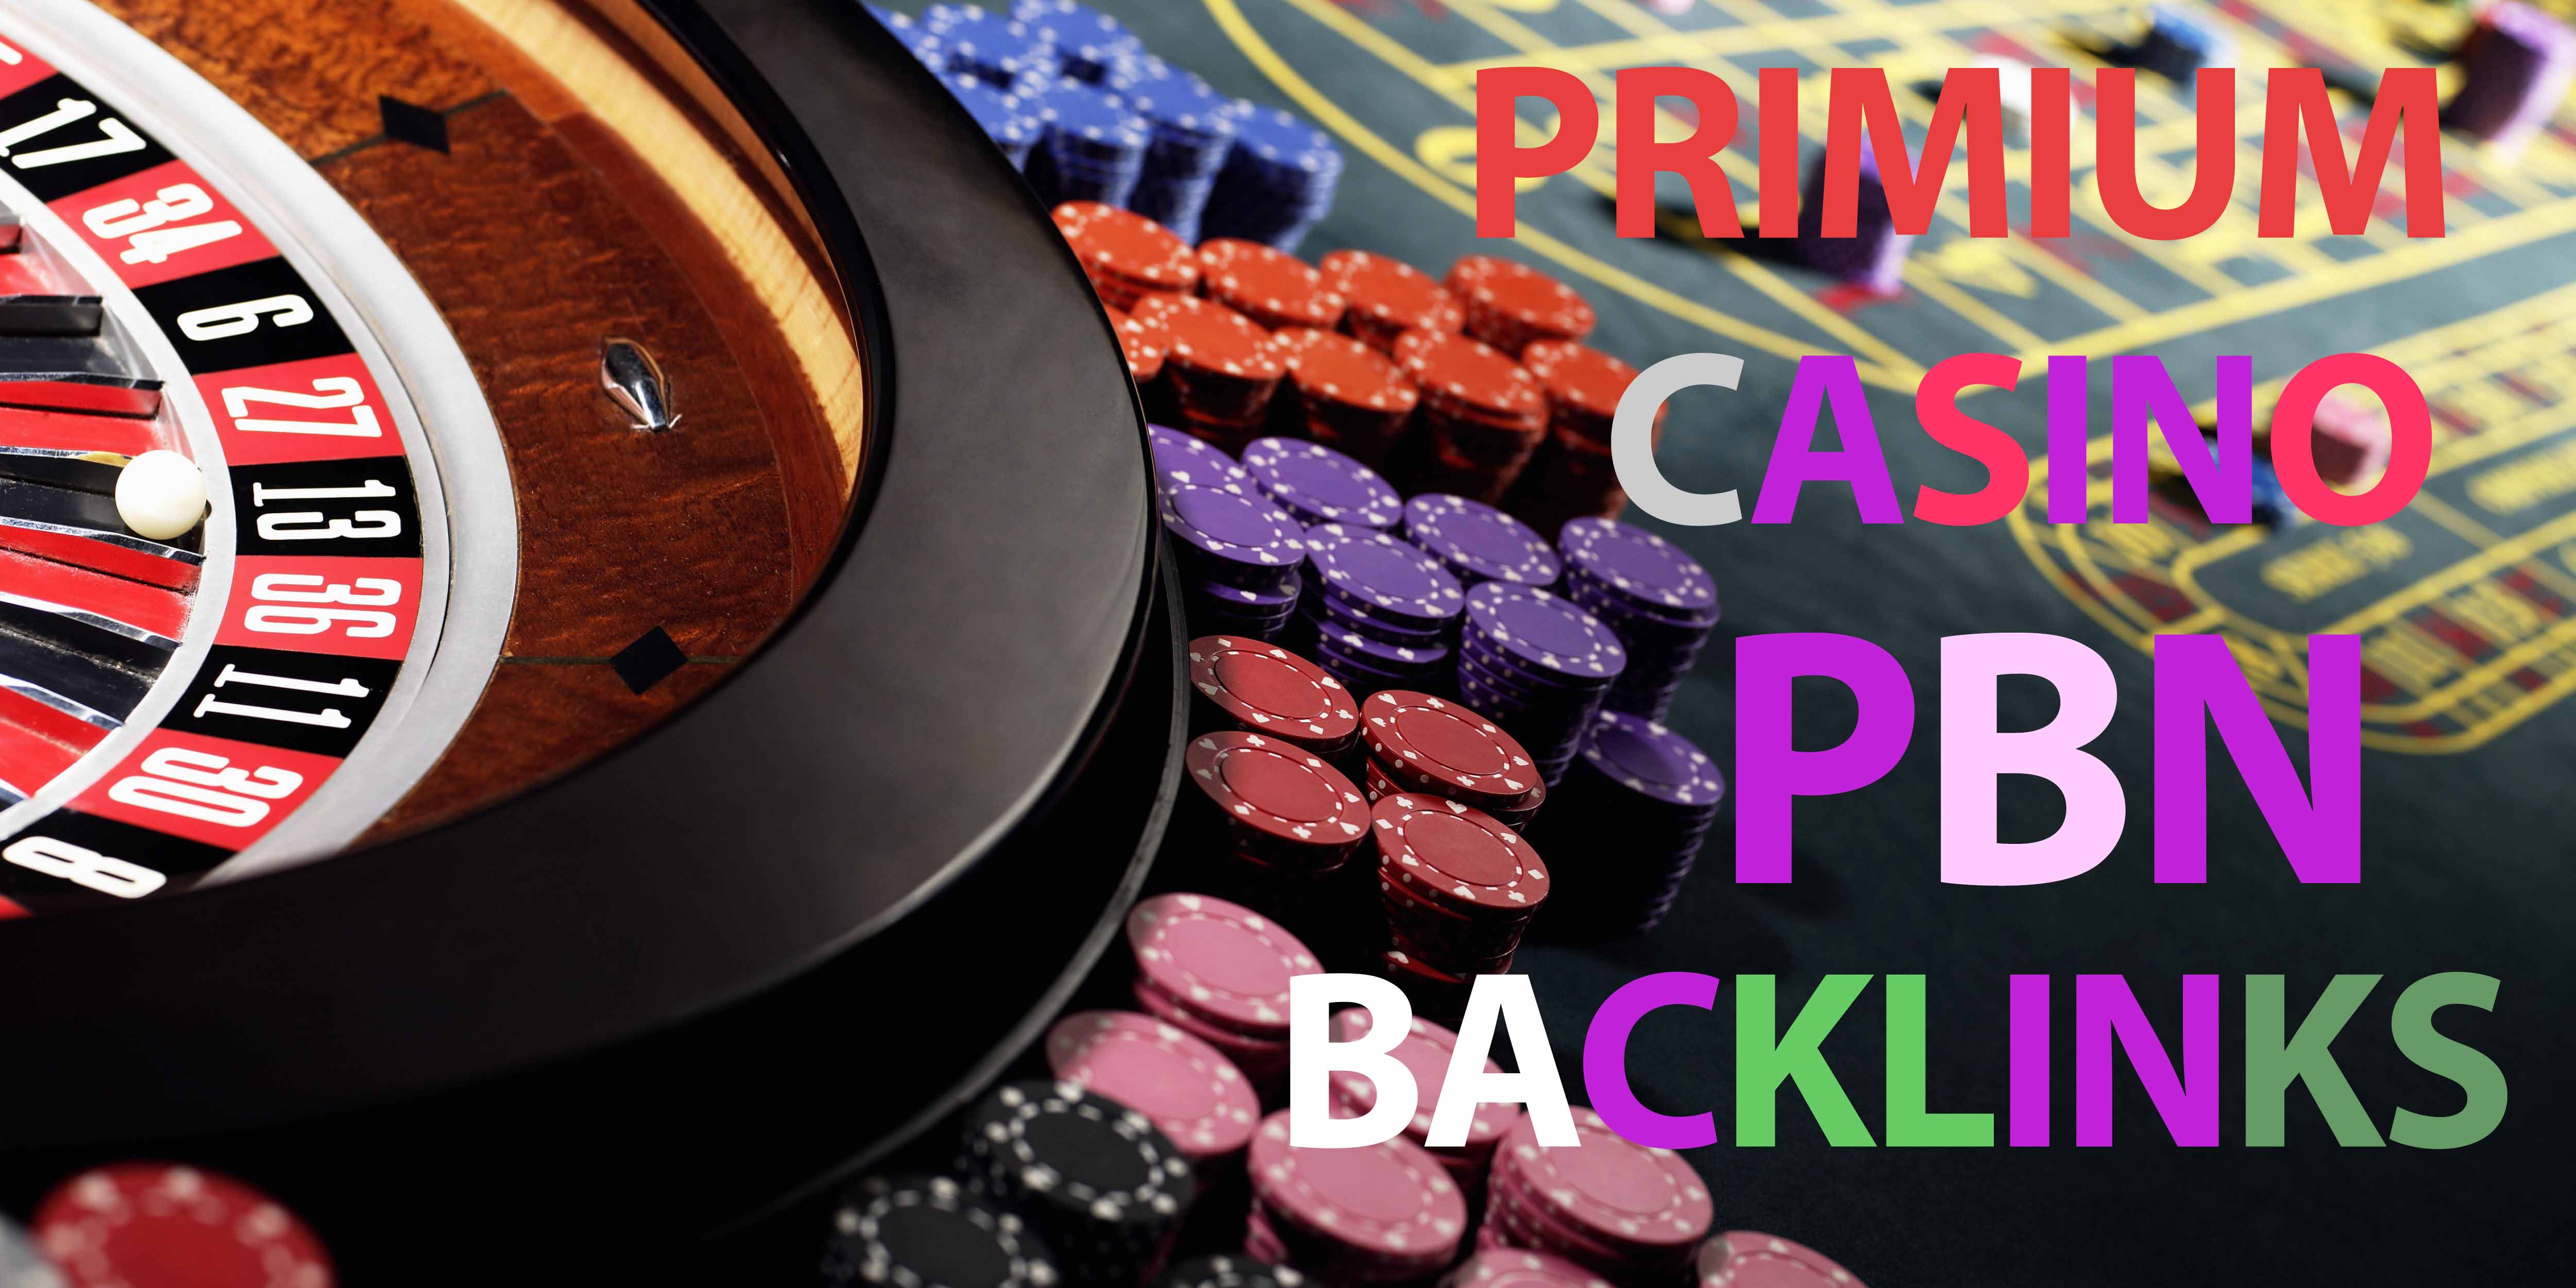 GET 200+ PRIMIUM CASINO PBN Backlink homepage web 2.0 with HIGH DA/PA/CF/TF WITH UNIQUE WEBSITE 